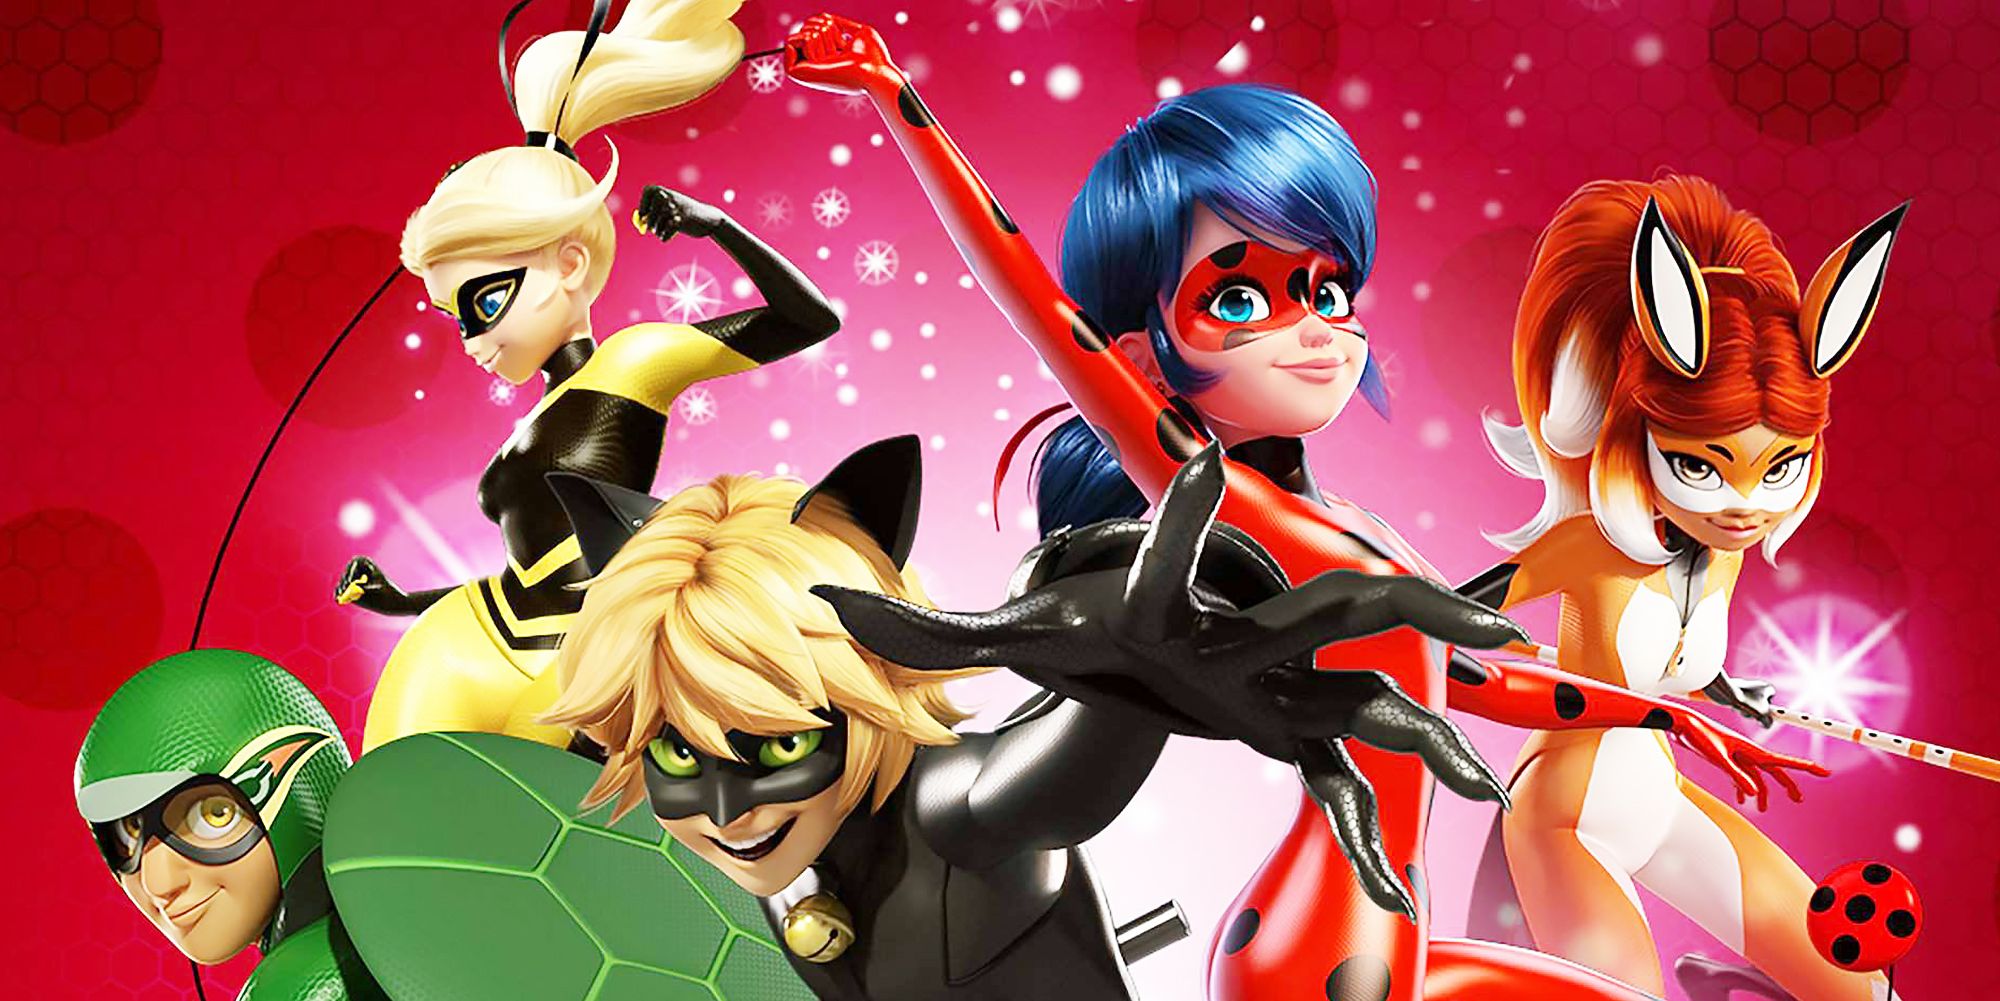 Where can i watch miraculous ladybug